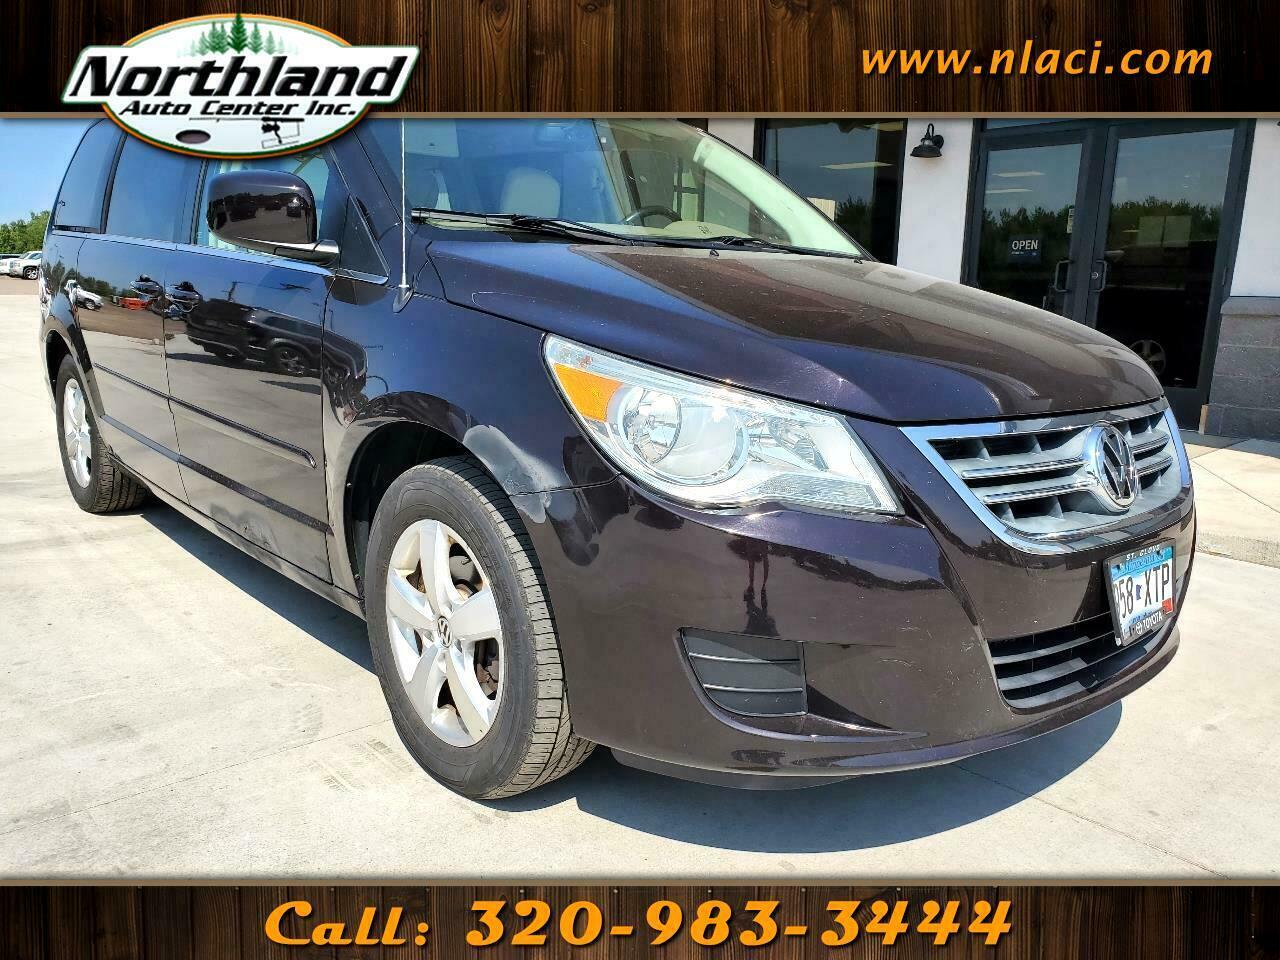 2010 Volkswagen Routan 4dr Wgn Highline 2010 Volkswagen Routan, Purple With 149840 Miles Available Now!